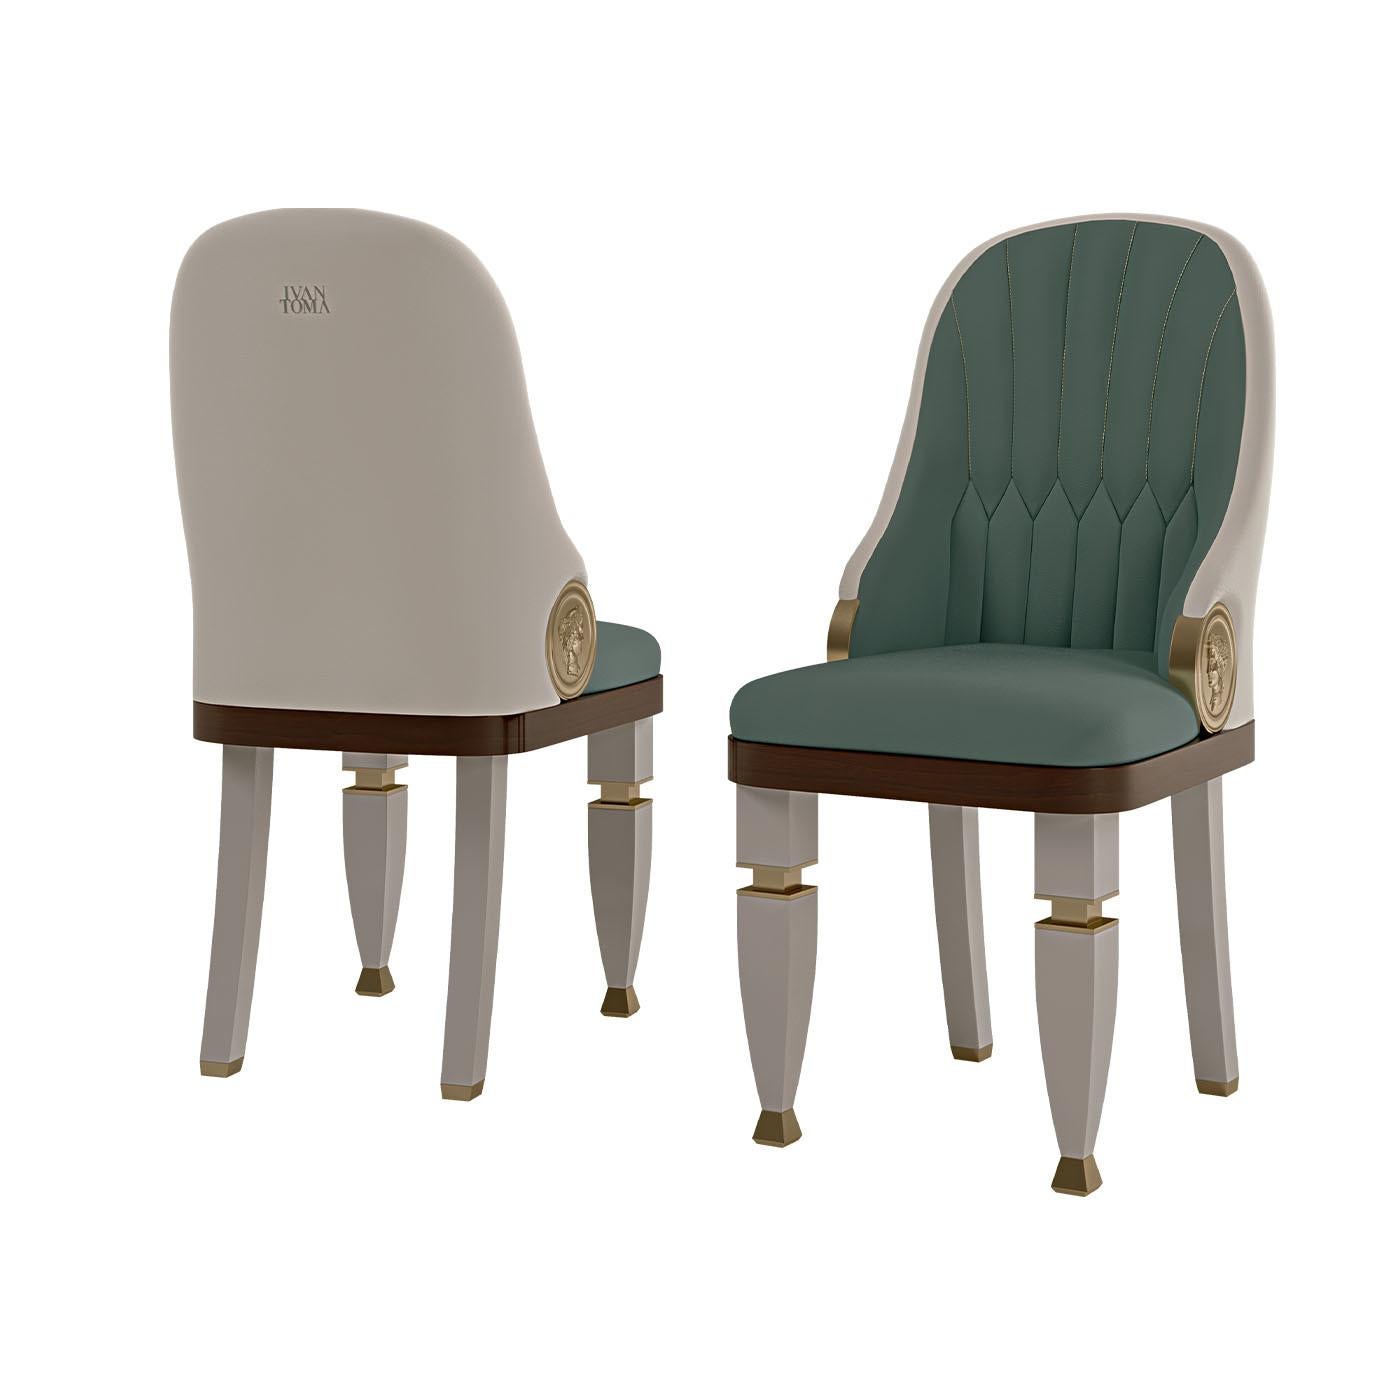 Defined by Renaissance, Baroque, and Egyptian style, this chair will elevate any living room or lounge decor. The ash frame has white-lacquered legs with gilded metal inserts contrasting the seat base is finished in medium-toned wood. Incorporating